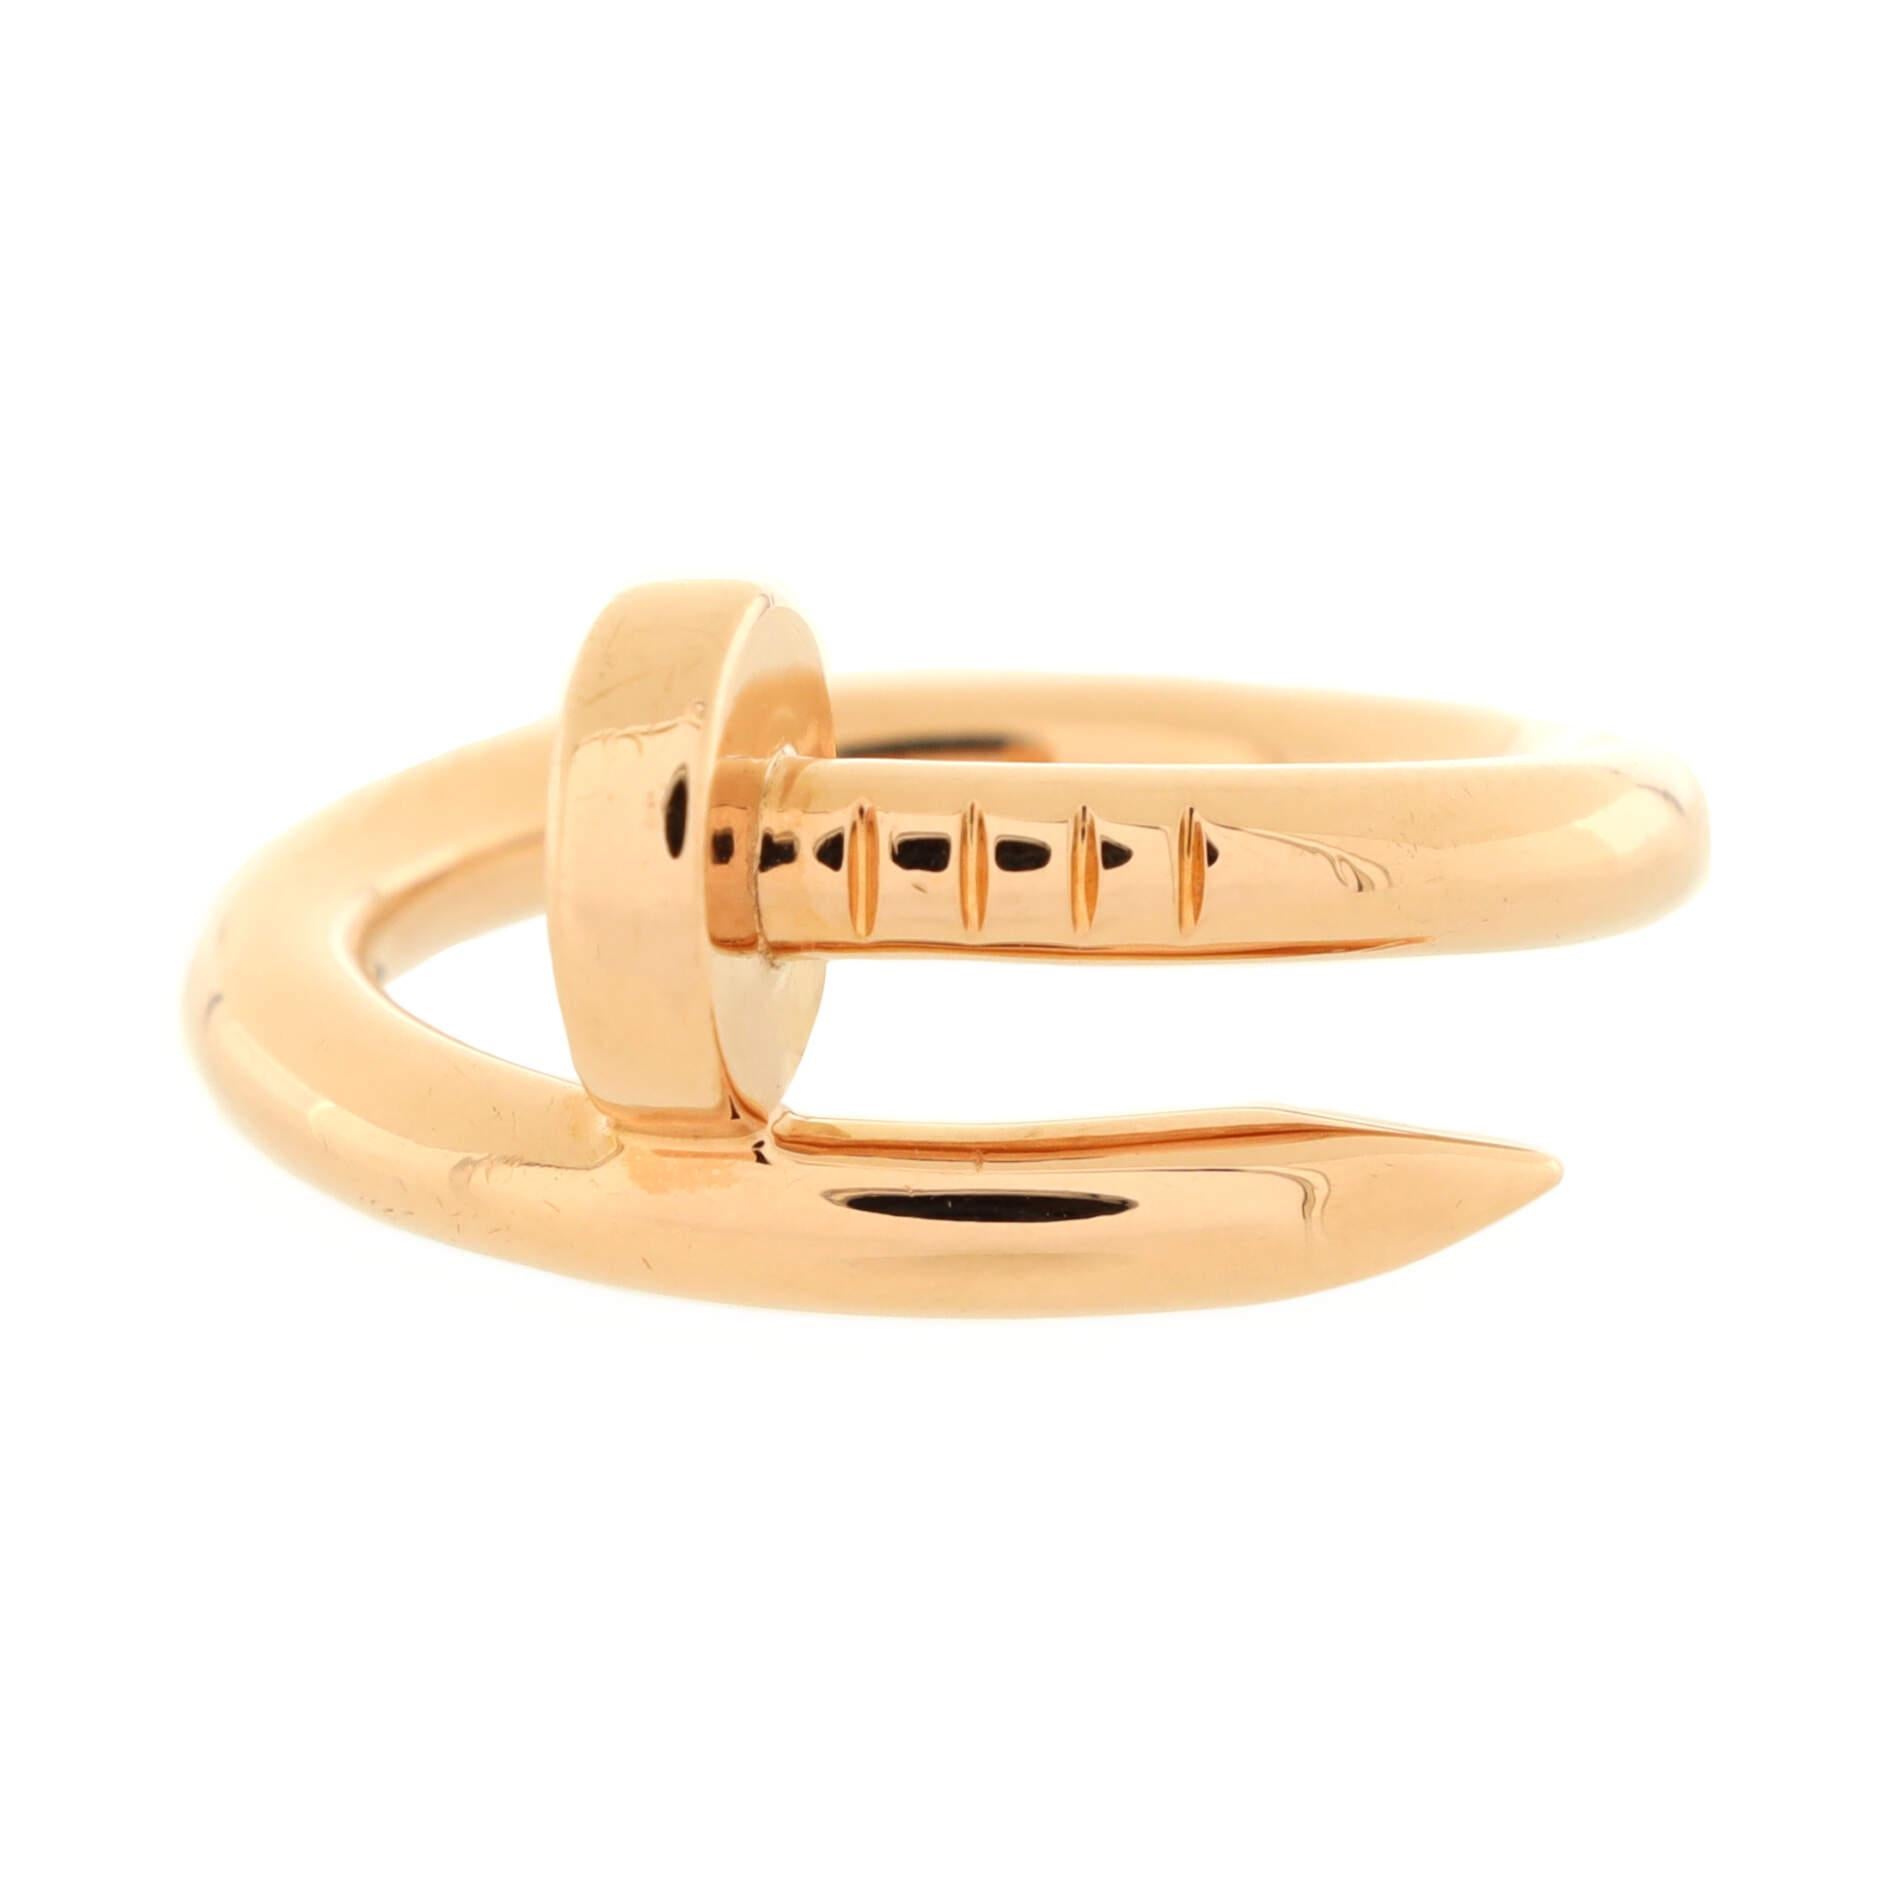 Condition: Great. Minor wear and re-polishing throughout.
Accessories: No Accessories
Measurements: Size: 5.25 - 50, Width: 2.65 mm
Designer: Cartier
Model: Juste un Clou Ring 18K Rose Gold
Exterior Color: Rose Gold
Item Number: 215480/30